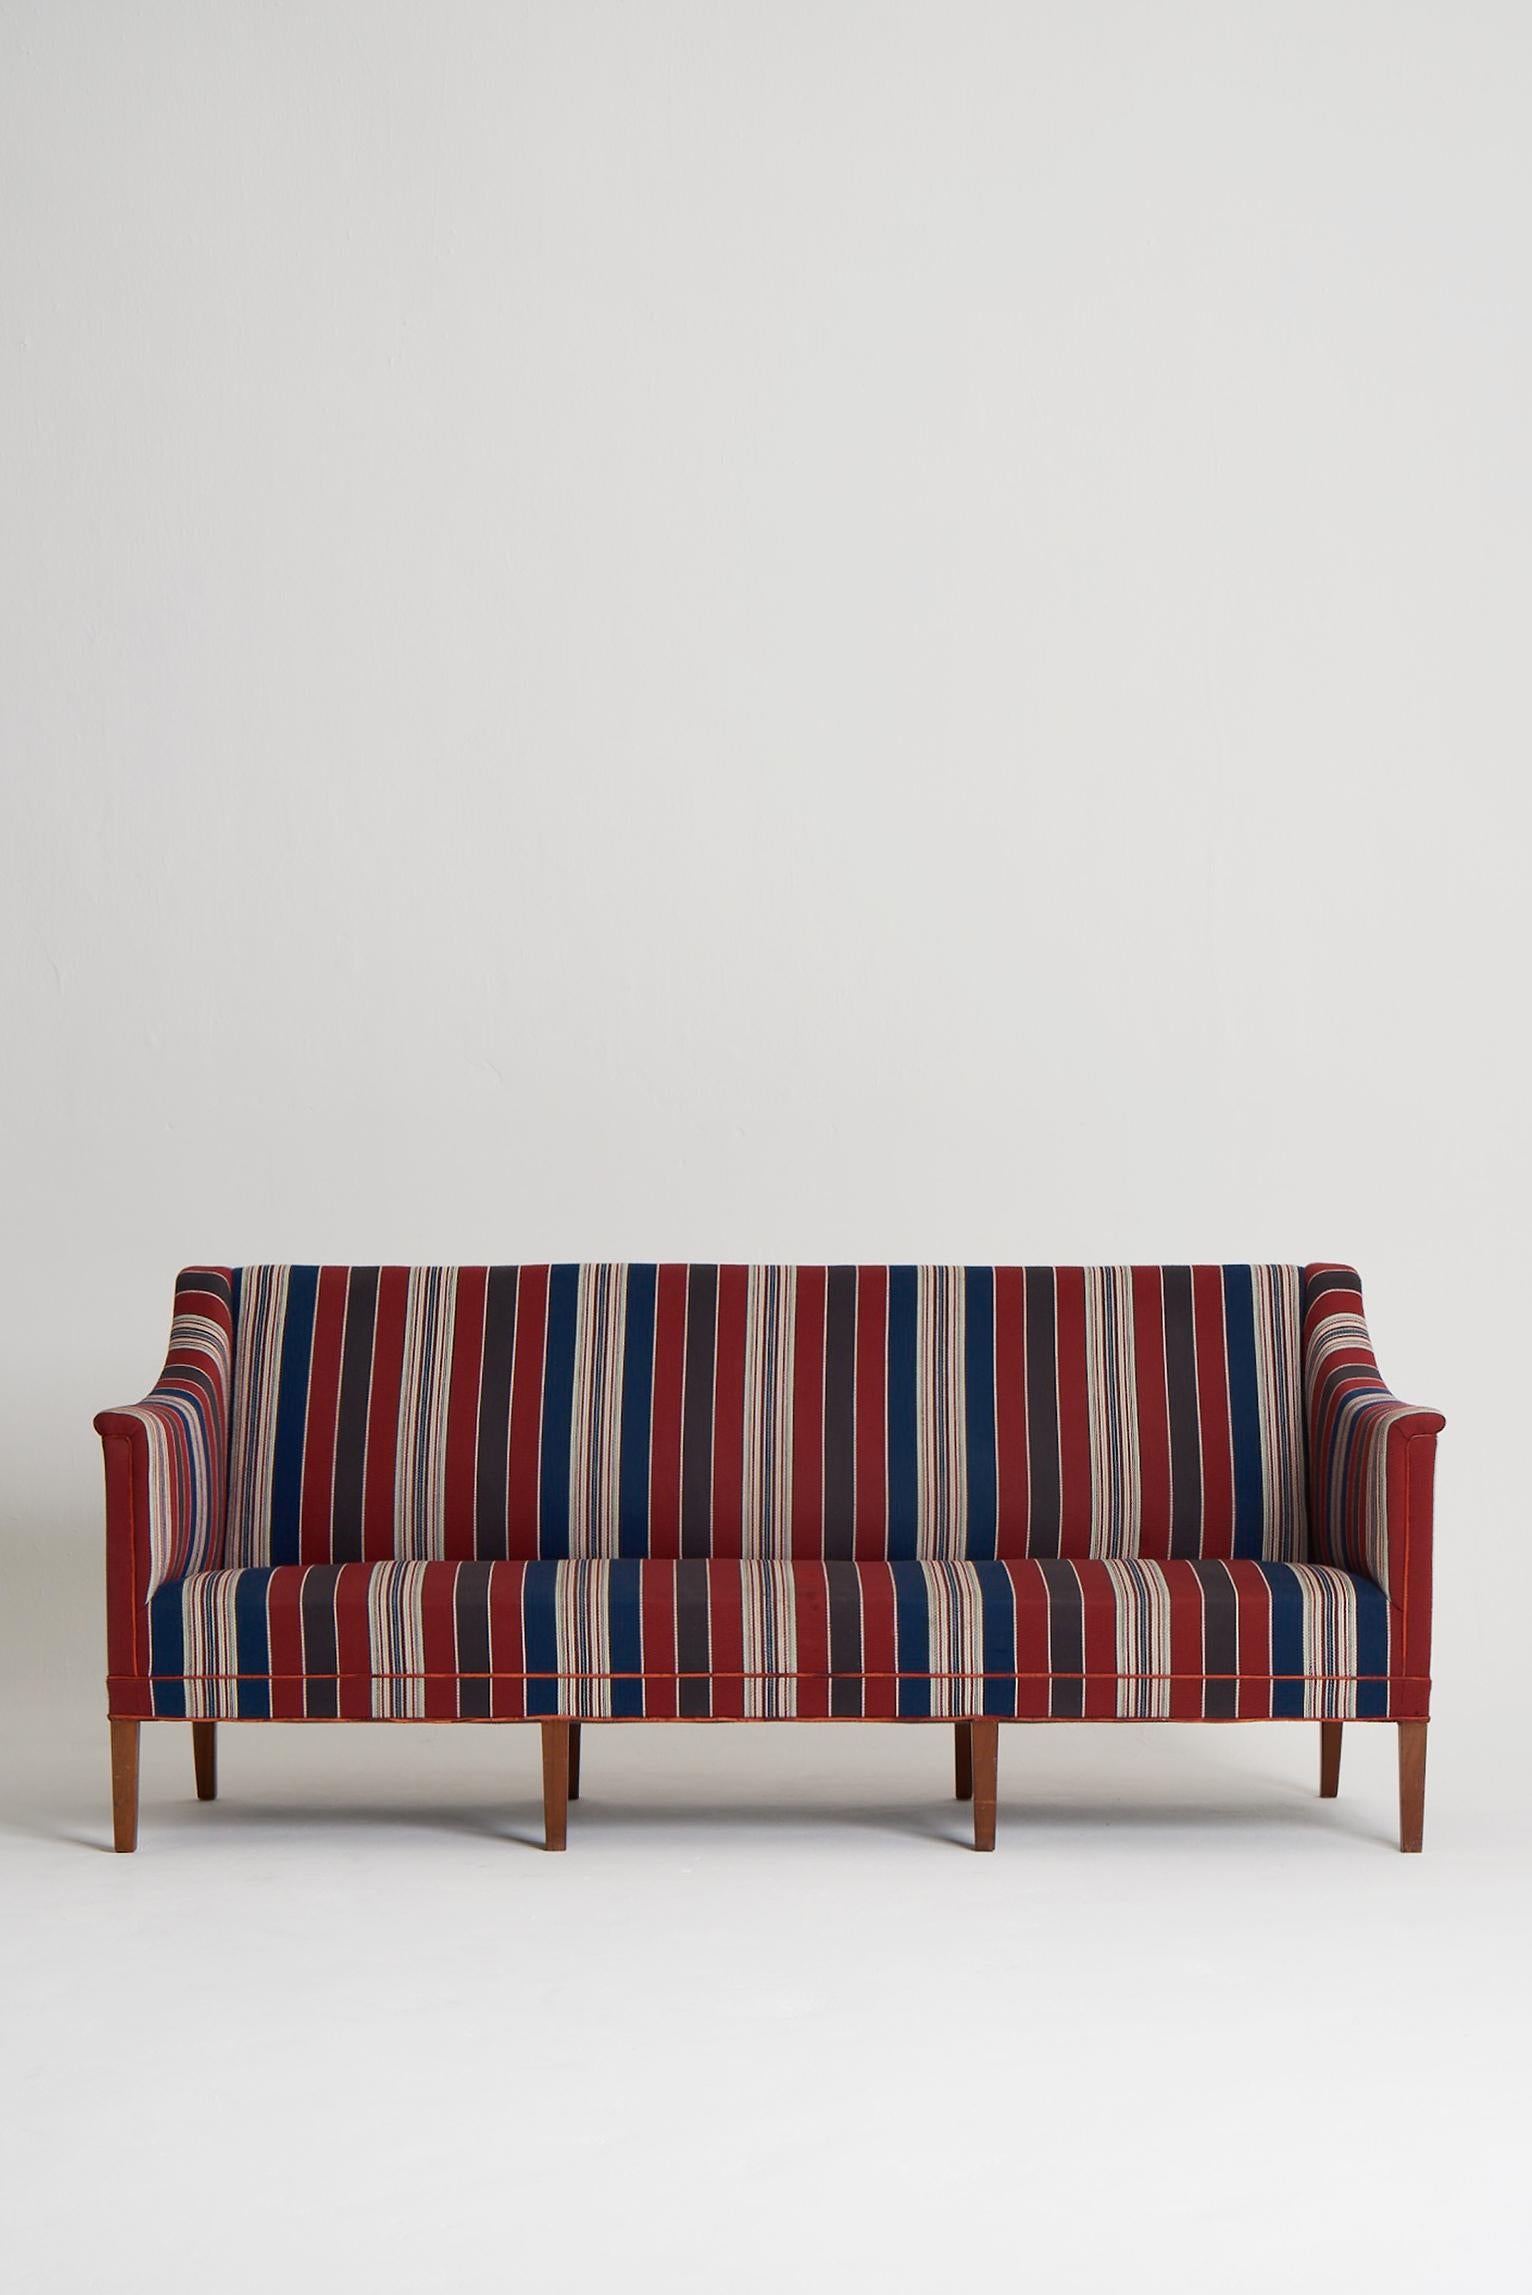 A vintage model 6092 three to four seat sofa designed by Kaare Klint (1888-1954) for Rud Rasmussen.
The sofa stands on eight tapered solid mahogany legs and is upholstered in its original 'Greek Fabric' which was also designed by Klint in